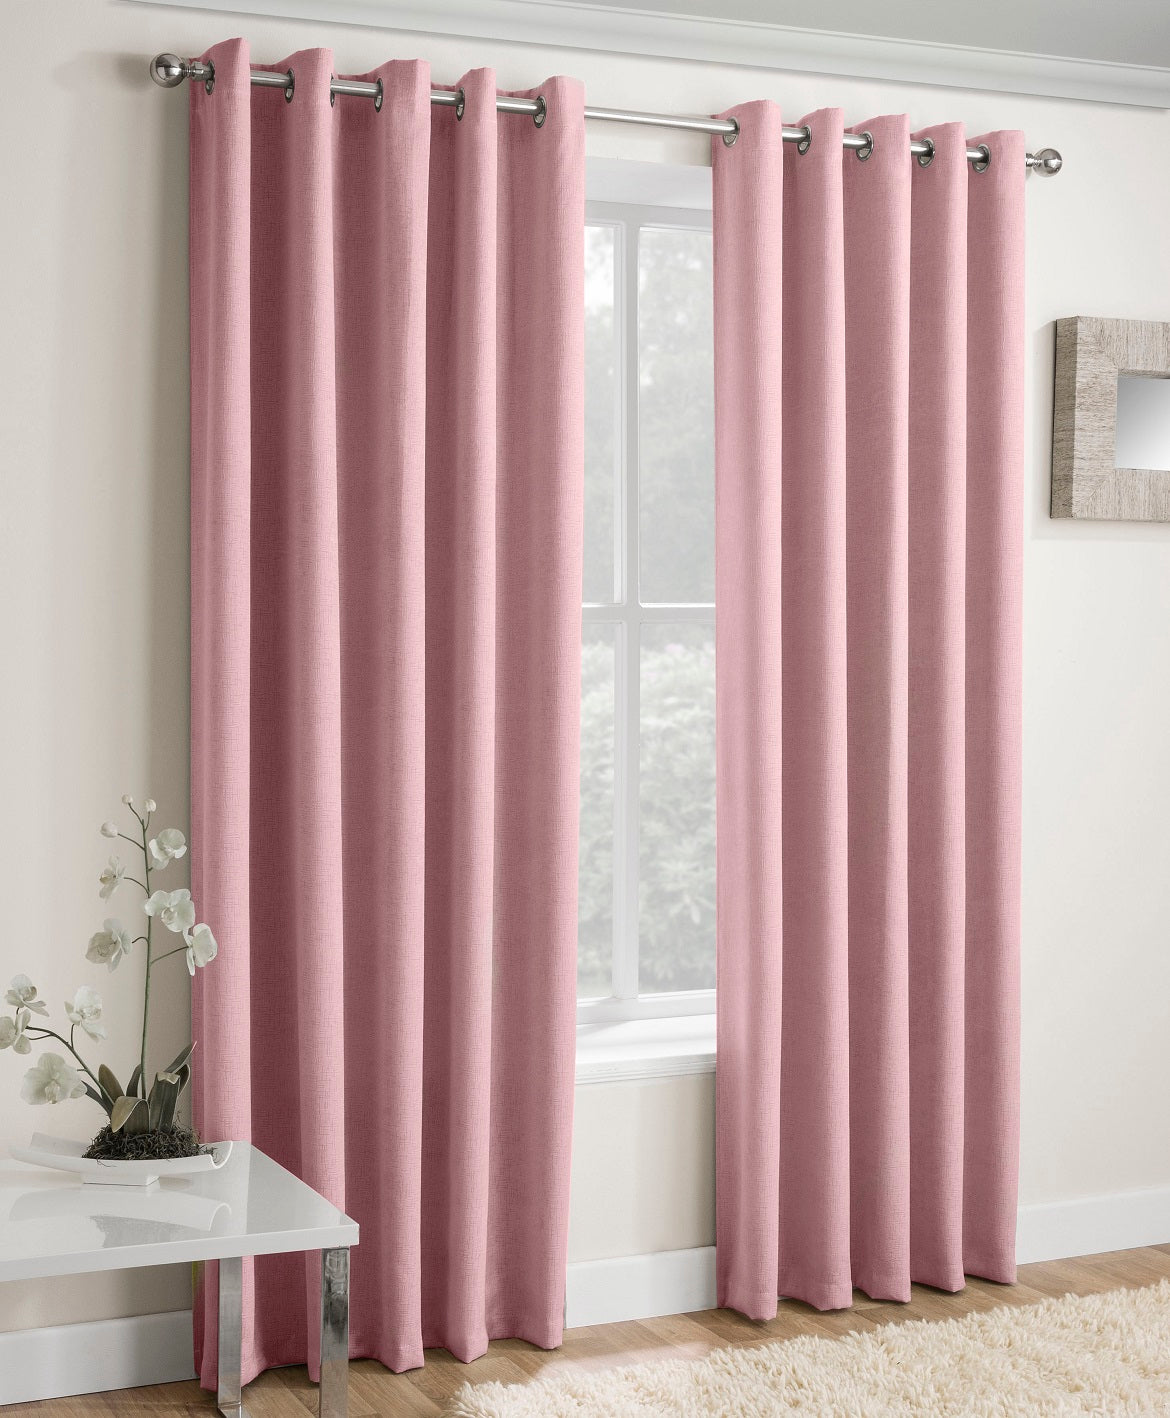 90x90" Vogue Blockout Lined Curtains - Blush Pink